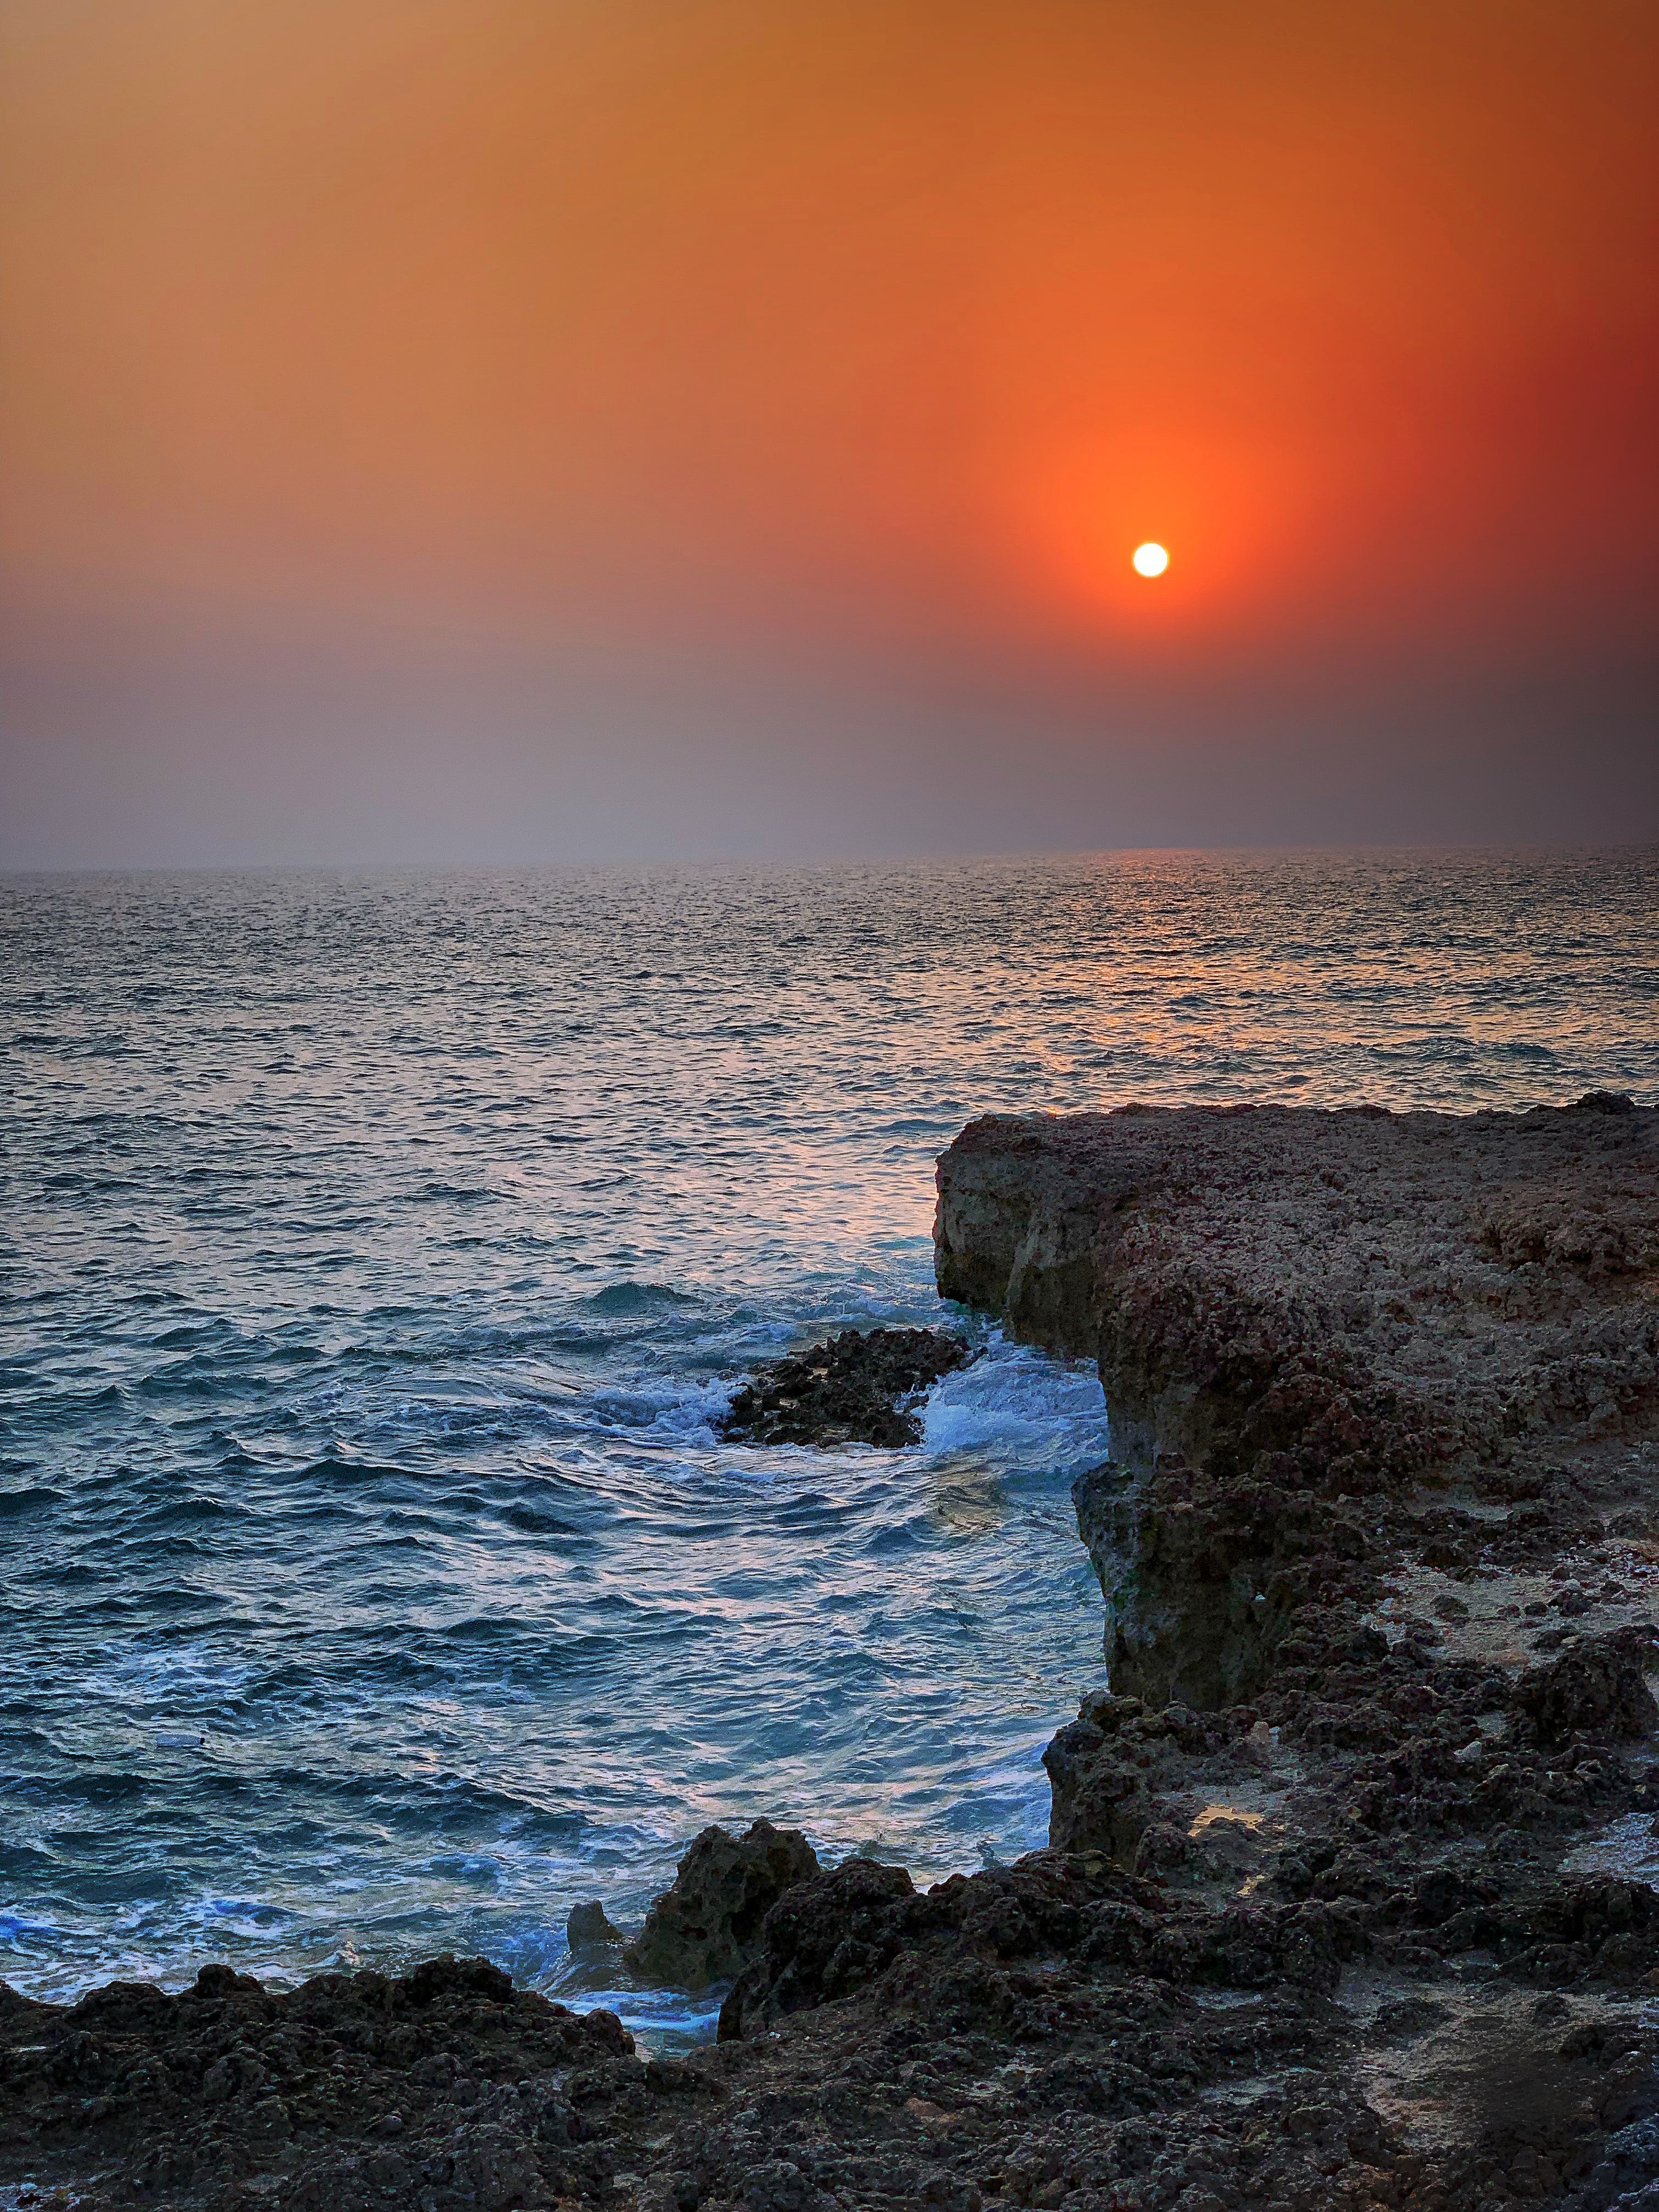 Kish Island Picture. Download Free Image